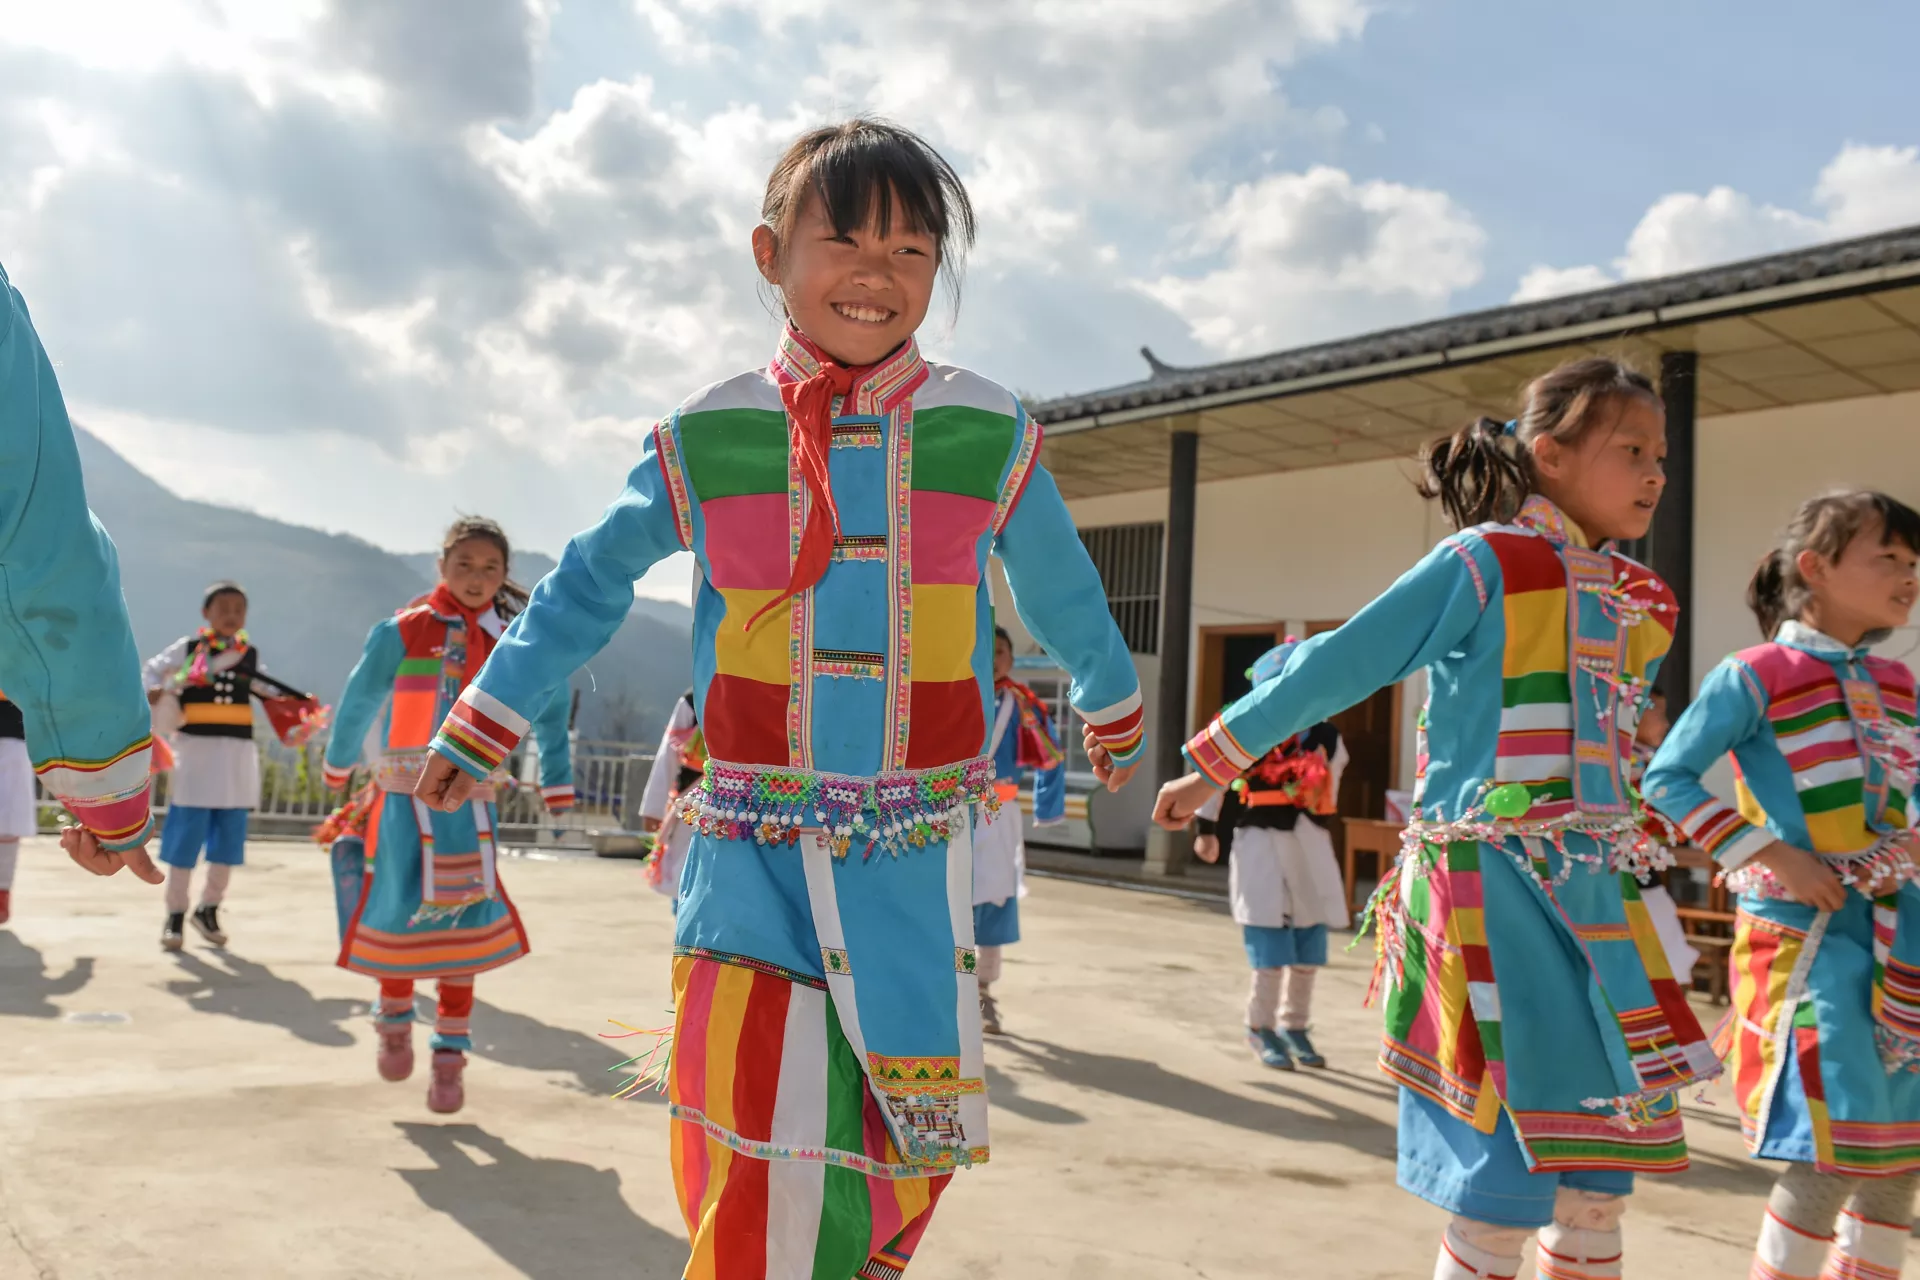 Students dressed in the traditional clothing of the Lisu ethnic minority dance during a UNICEF field visit on March 9, 2016 at Shaohuiba Primary School.